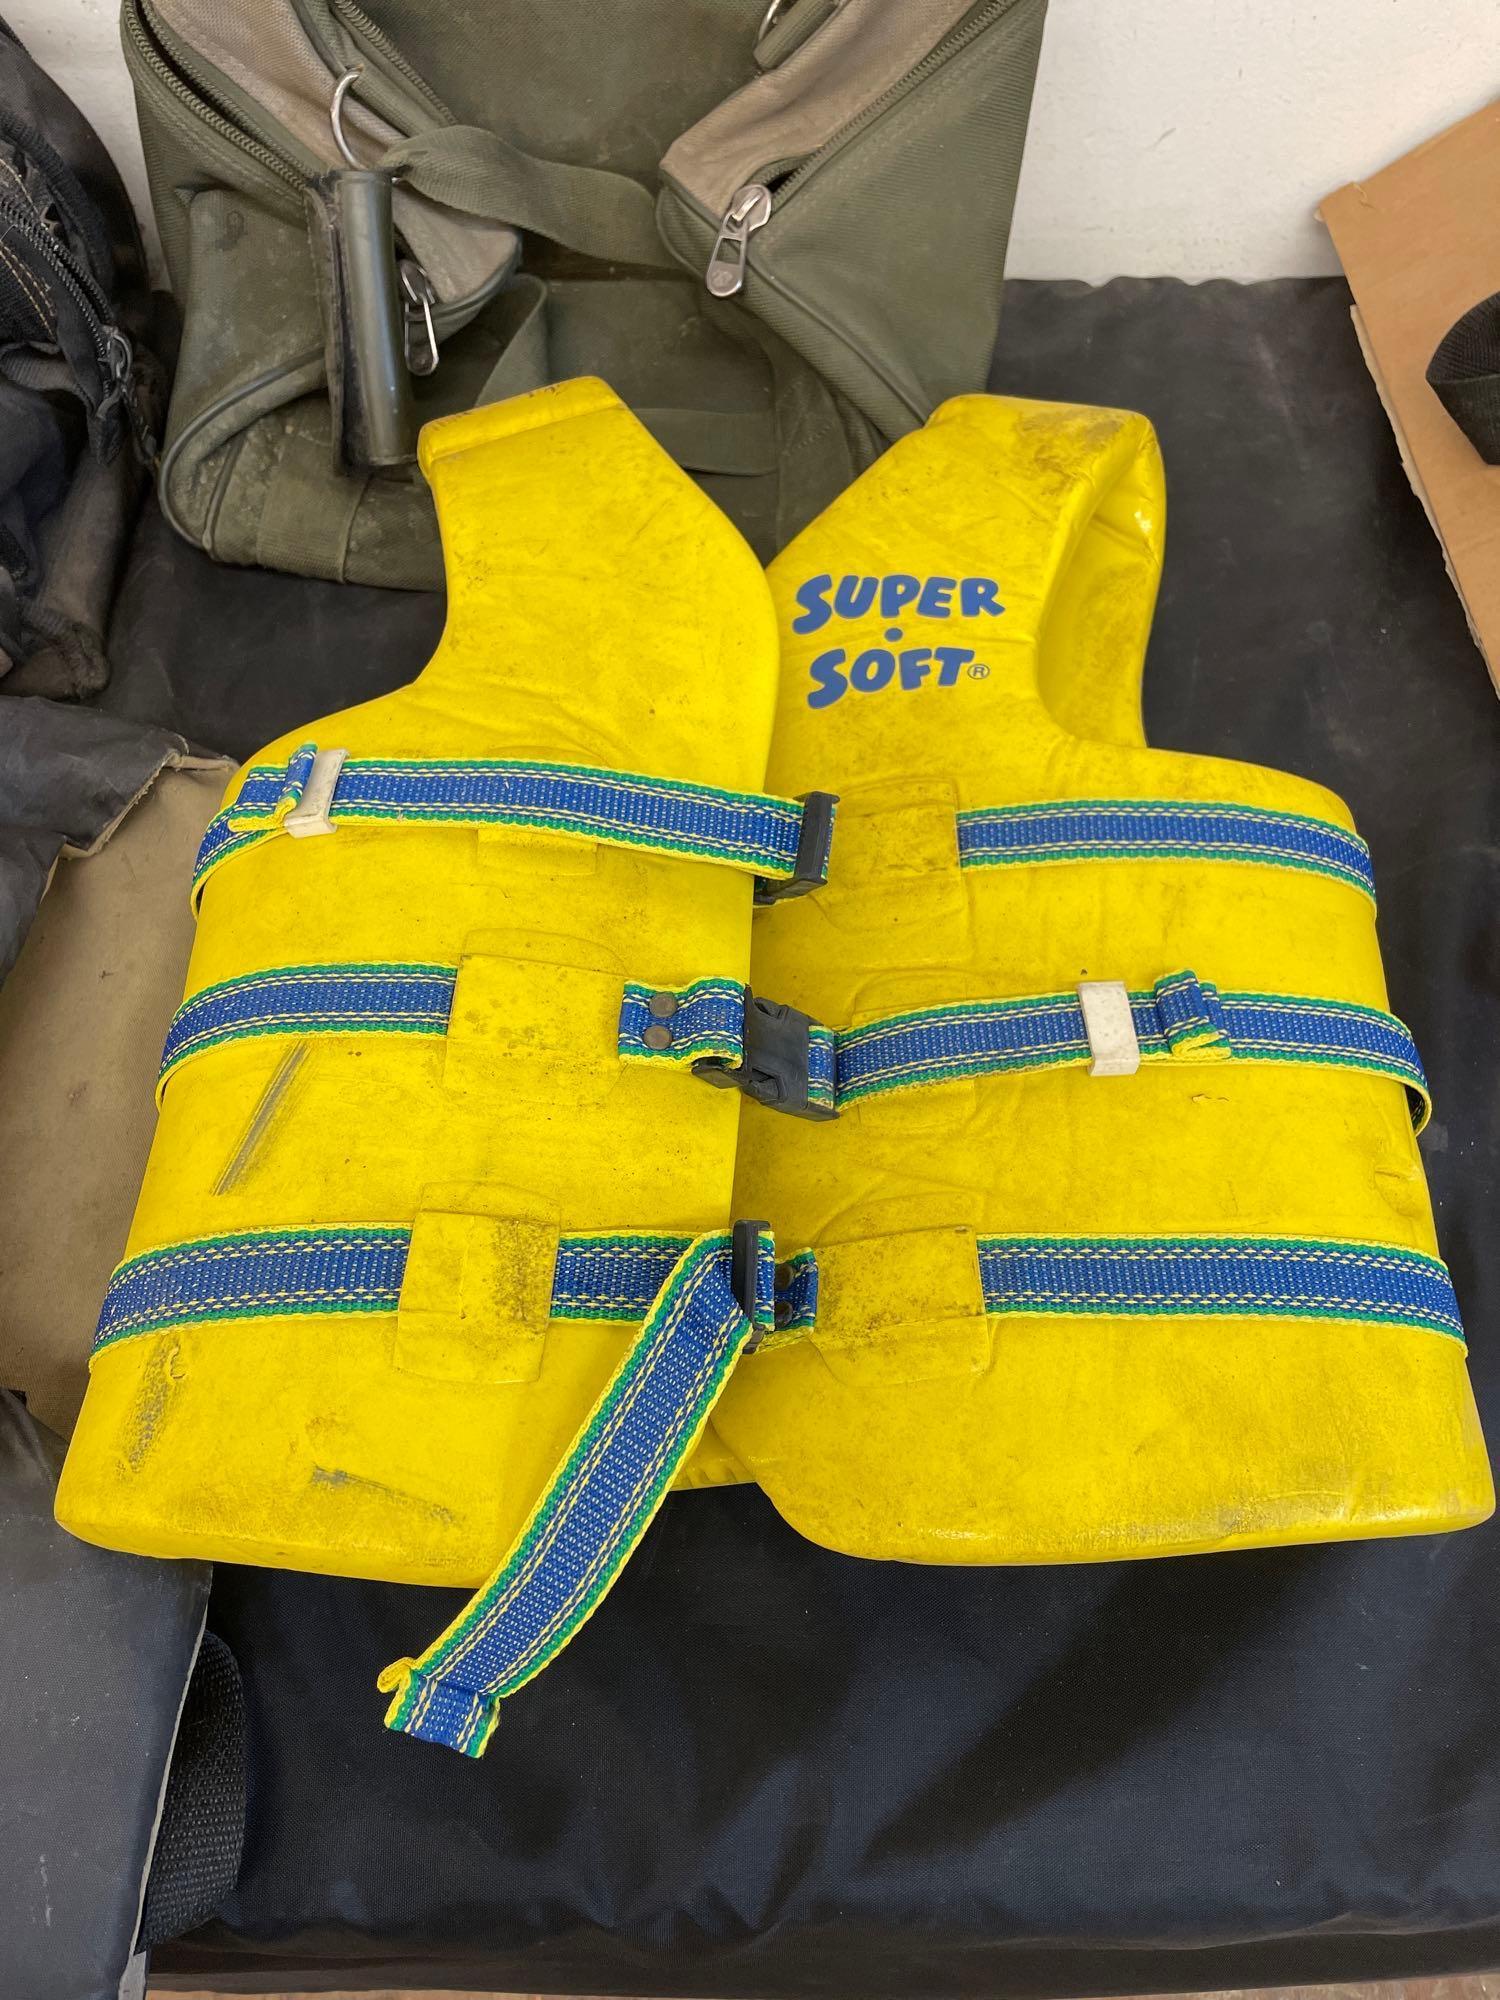 lifejackets, fishing reels and bags